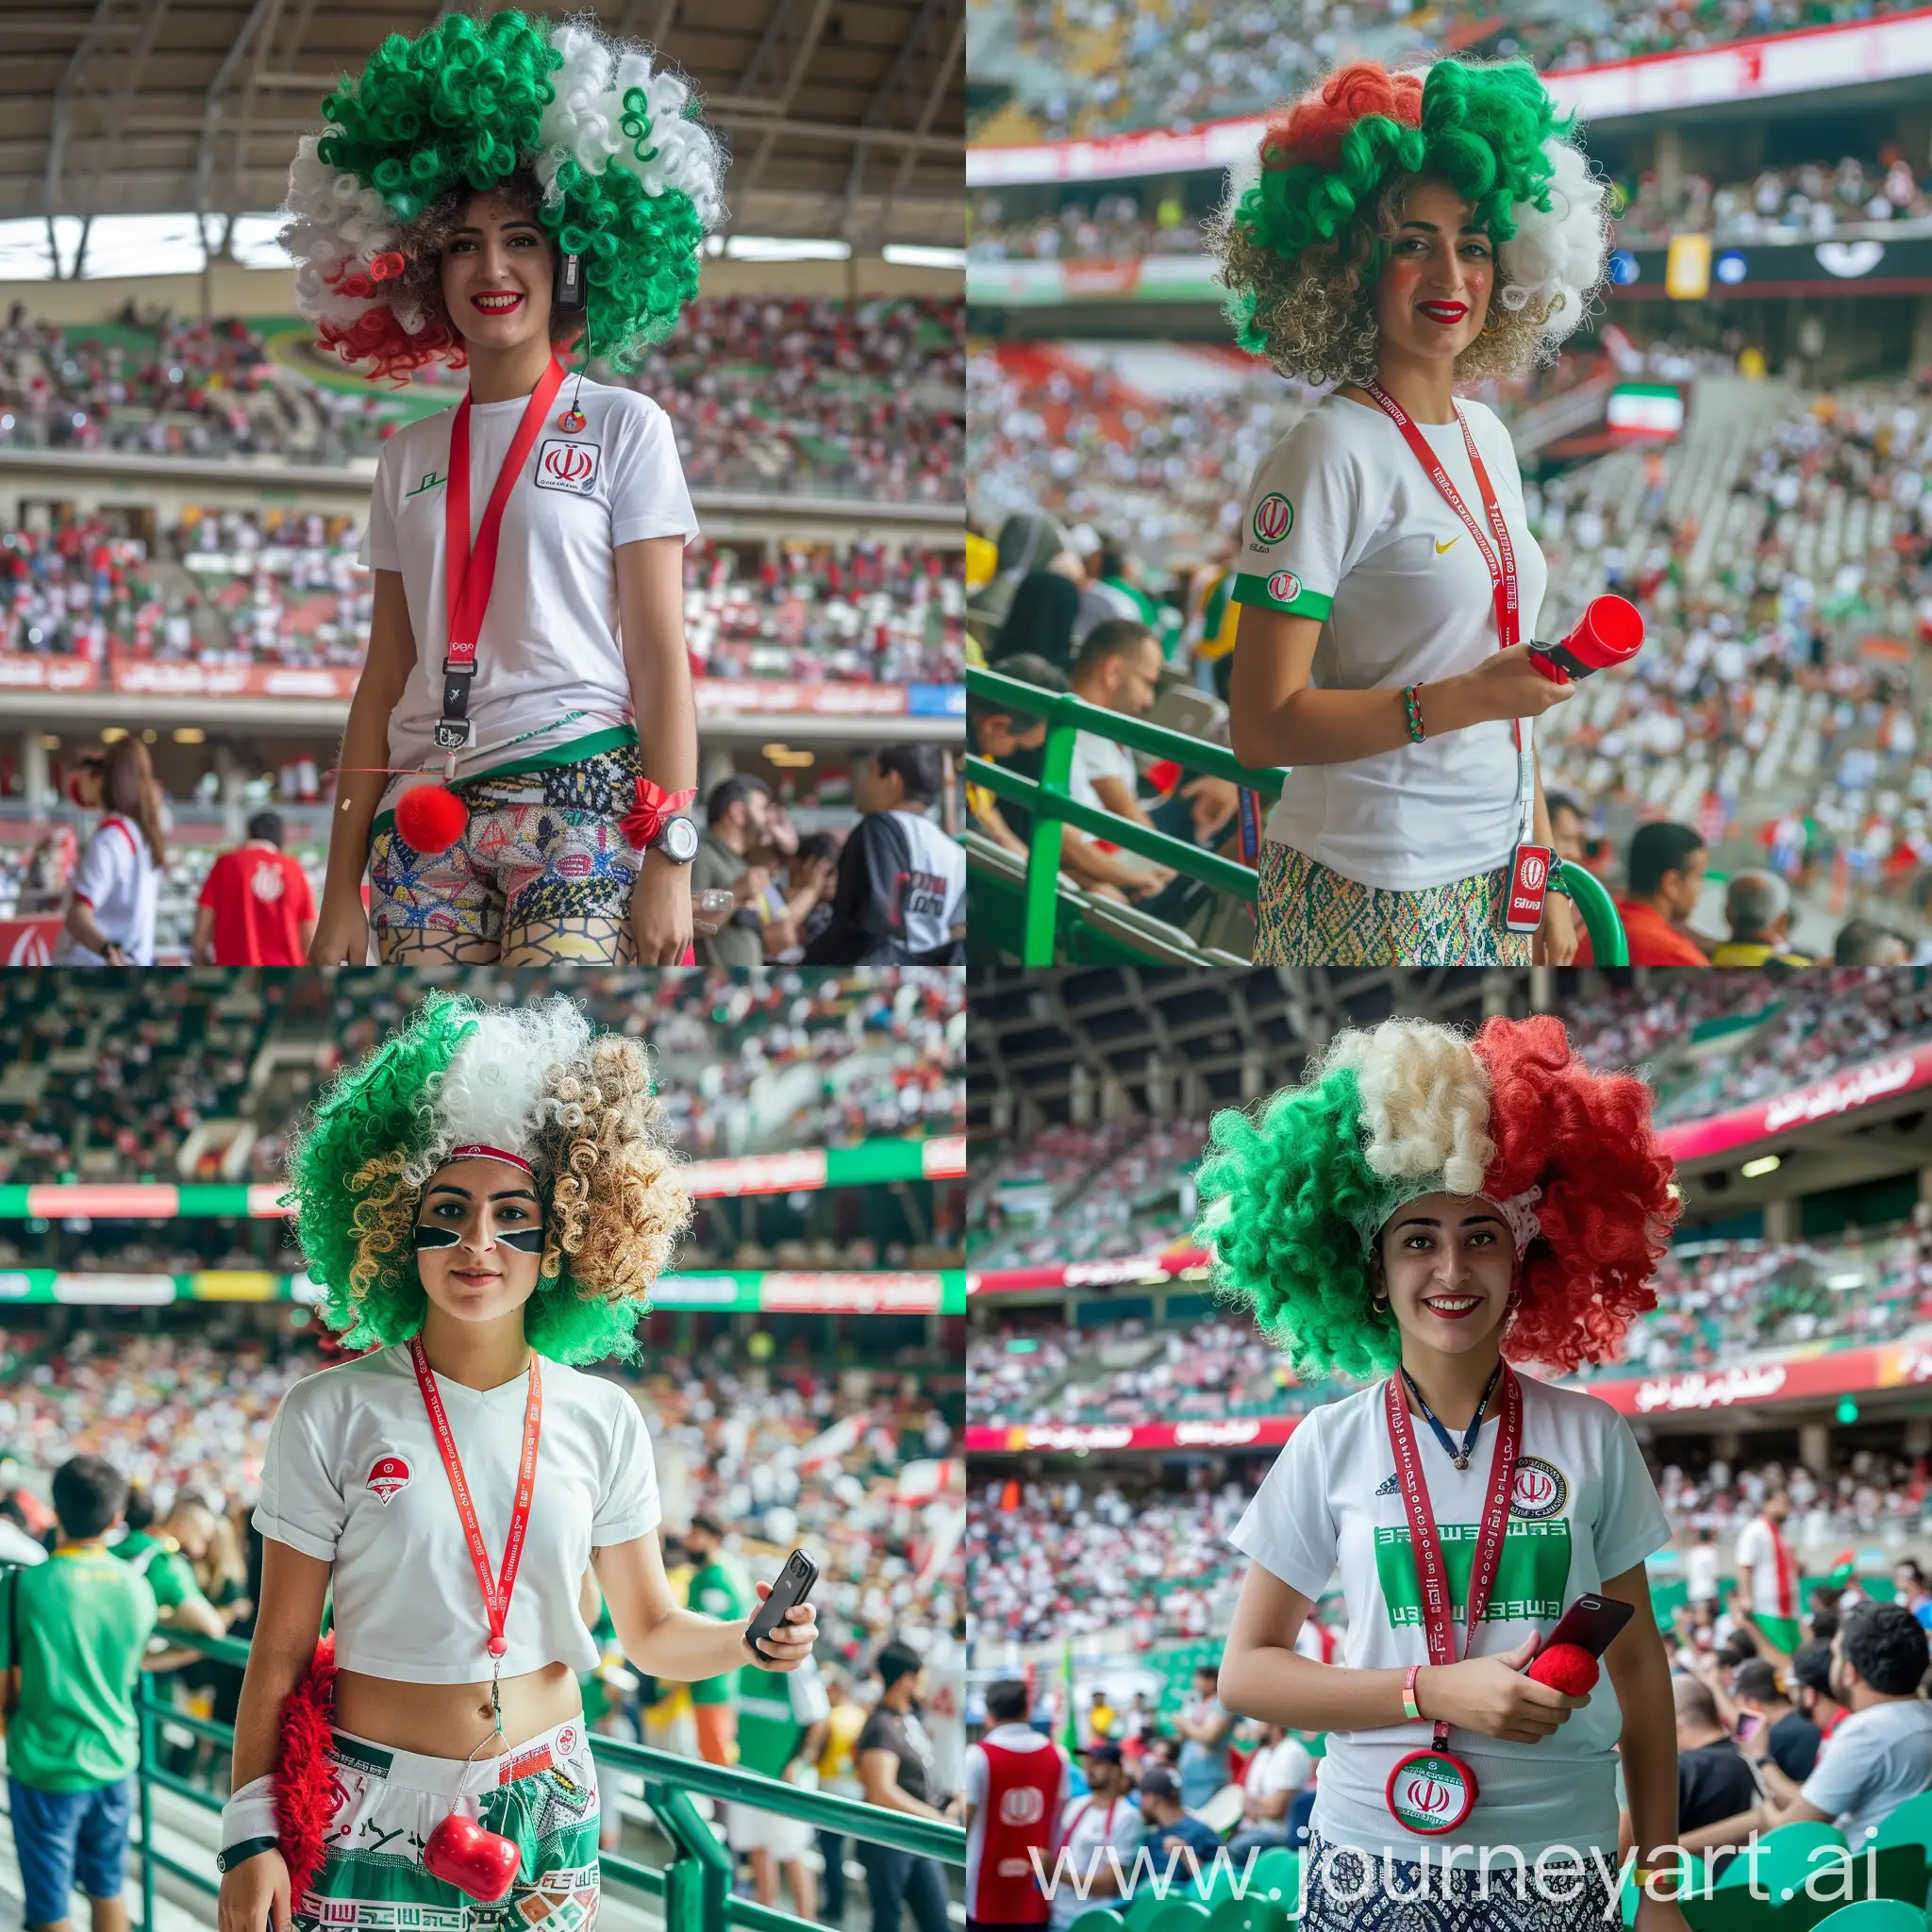 A female football fan wearing a curly wig in three colors: green, white, and red, standing in the stands of a football stadium. The fan is dressed in a white T-shirt and patterned shorts. Around her neck is a red phone lanyard with a phone attached. She is holding a red noise maker in her right hand, and she has a small flag sticker iran on her left arm. The stands are filled with excited spectators, creating a vibrant and lively atmosphere. -- ar 8:14